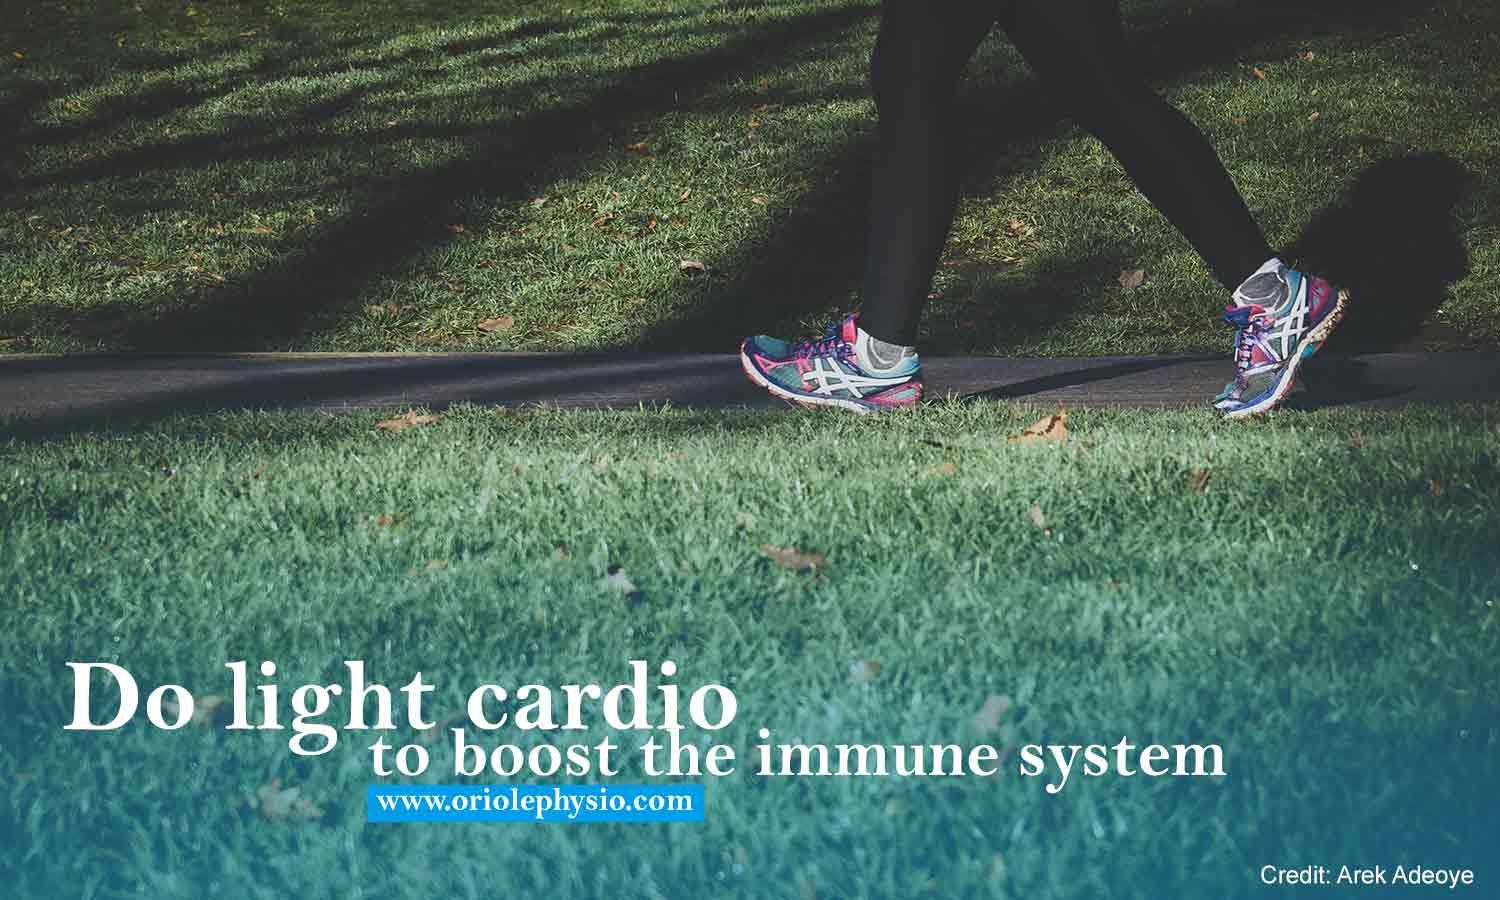 Do light cardio to boost the immune system